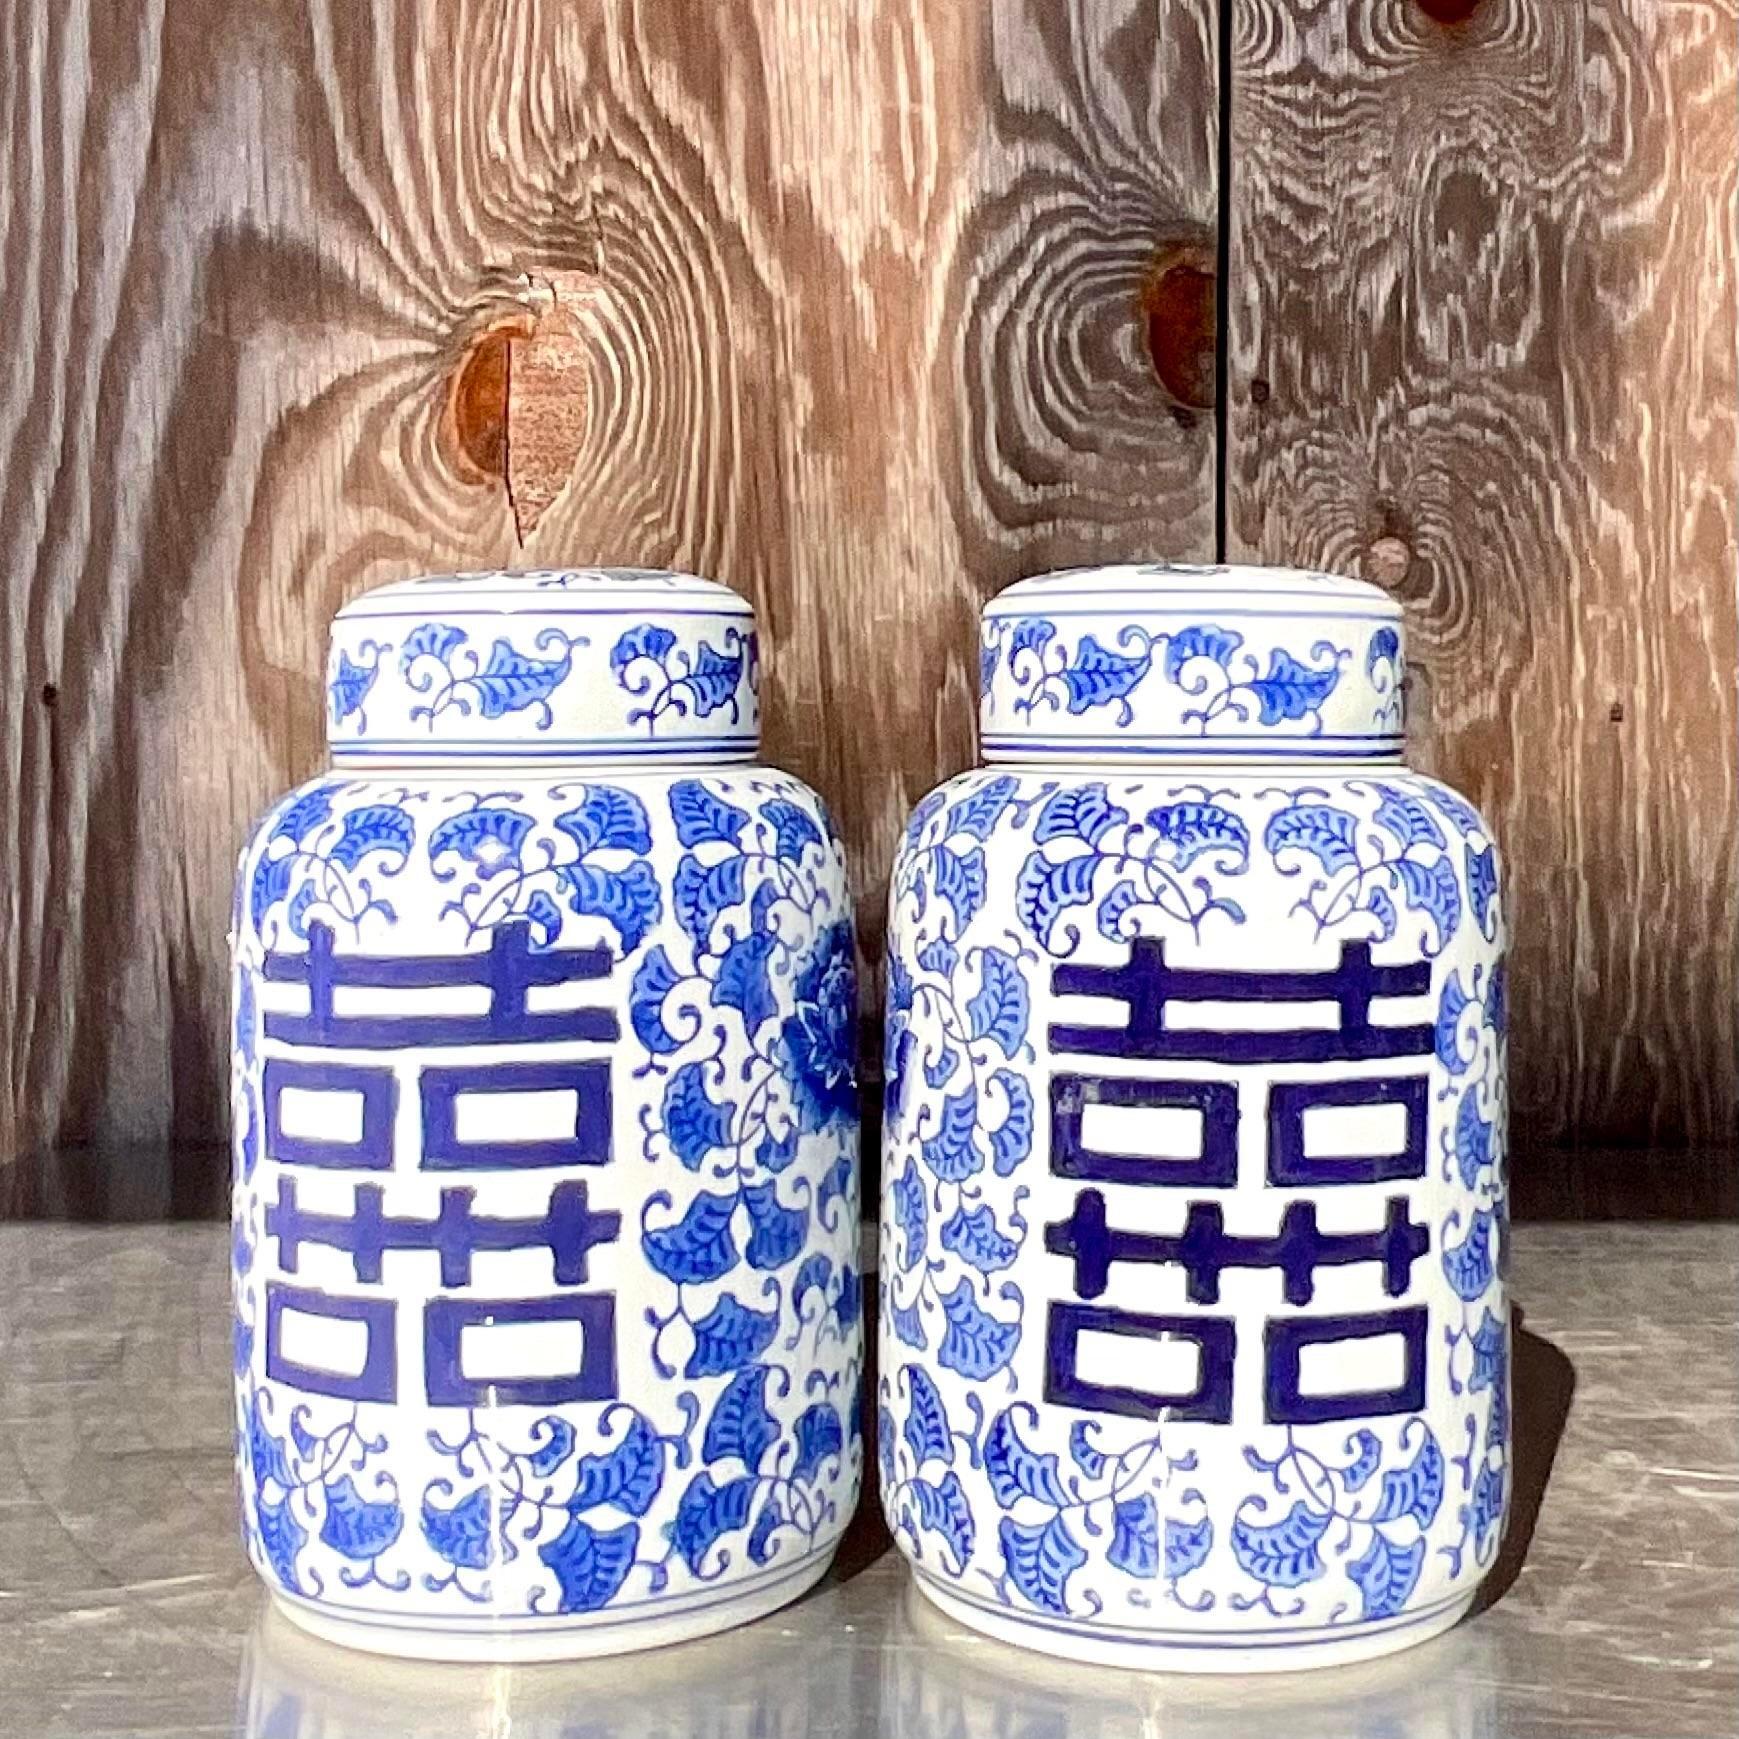 A fabulous pair of vintage Asian blue and white lidded urns. Beautiful iconic design with large Asian characters. Acquired from a Palm Beach estate.